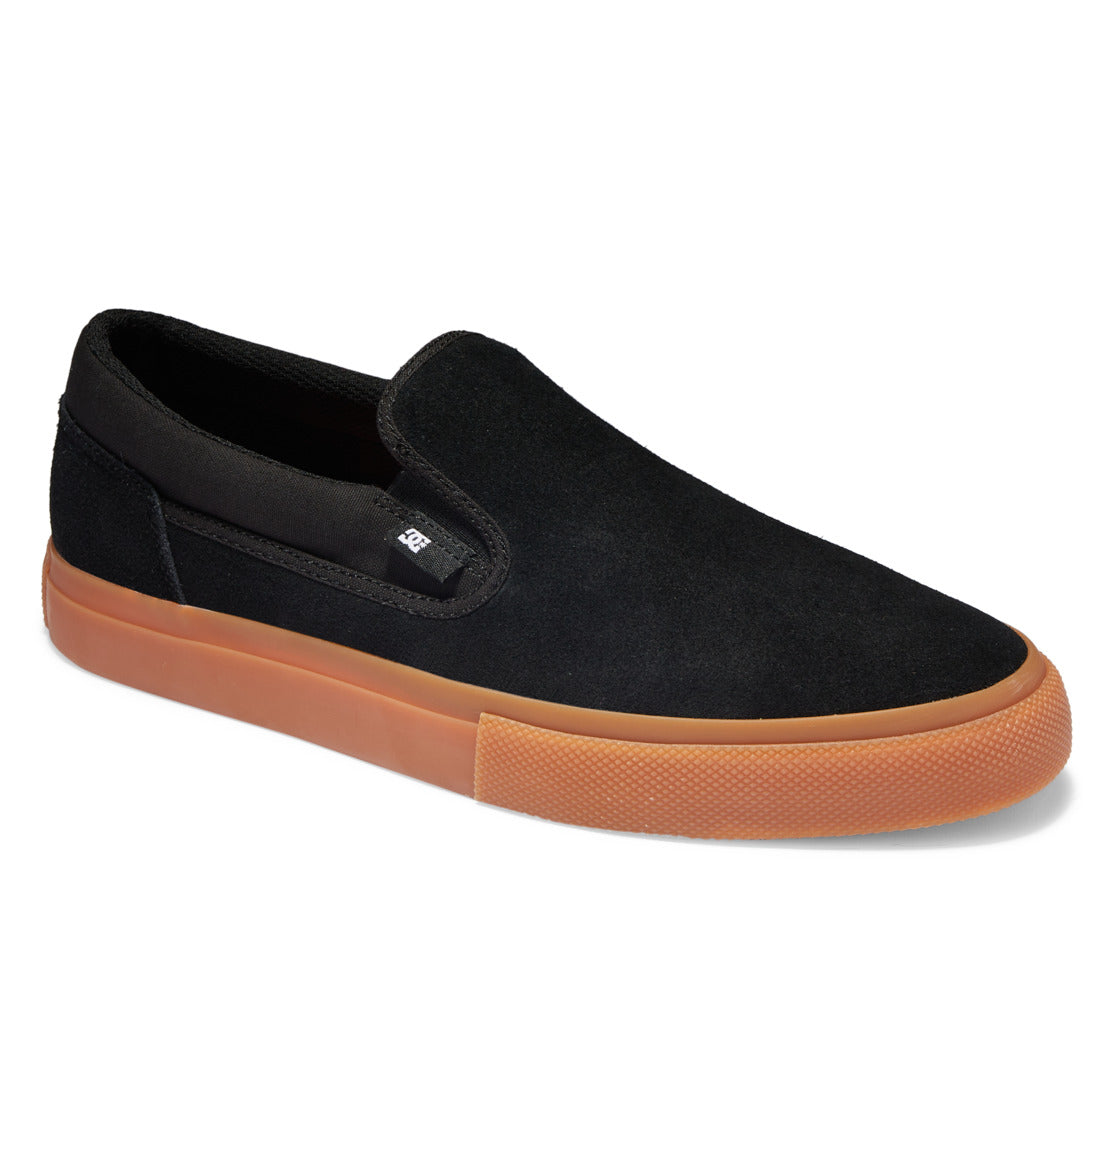 MANUAL SLIP-ON SHOES